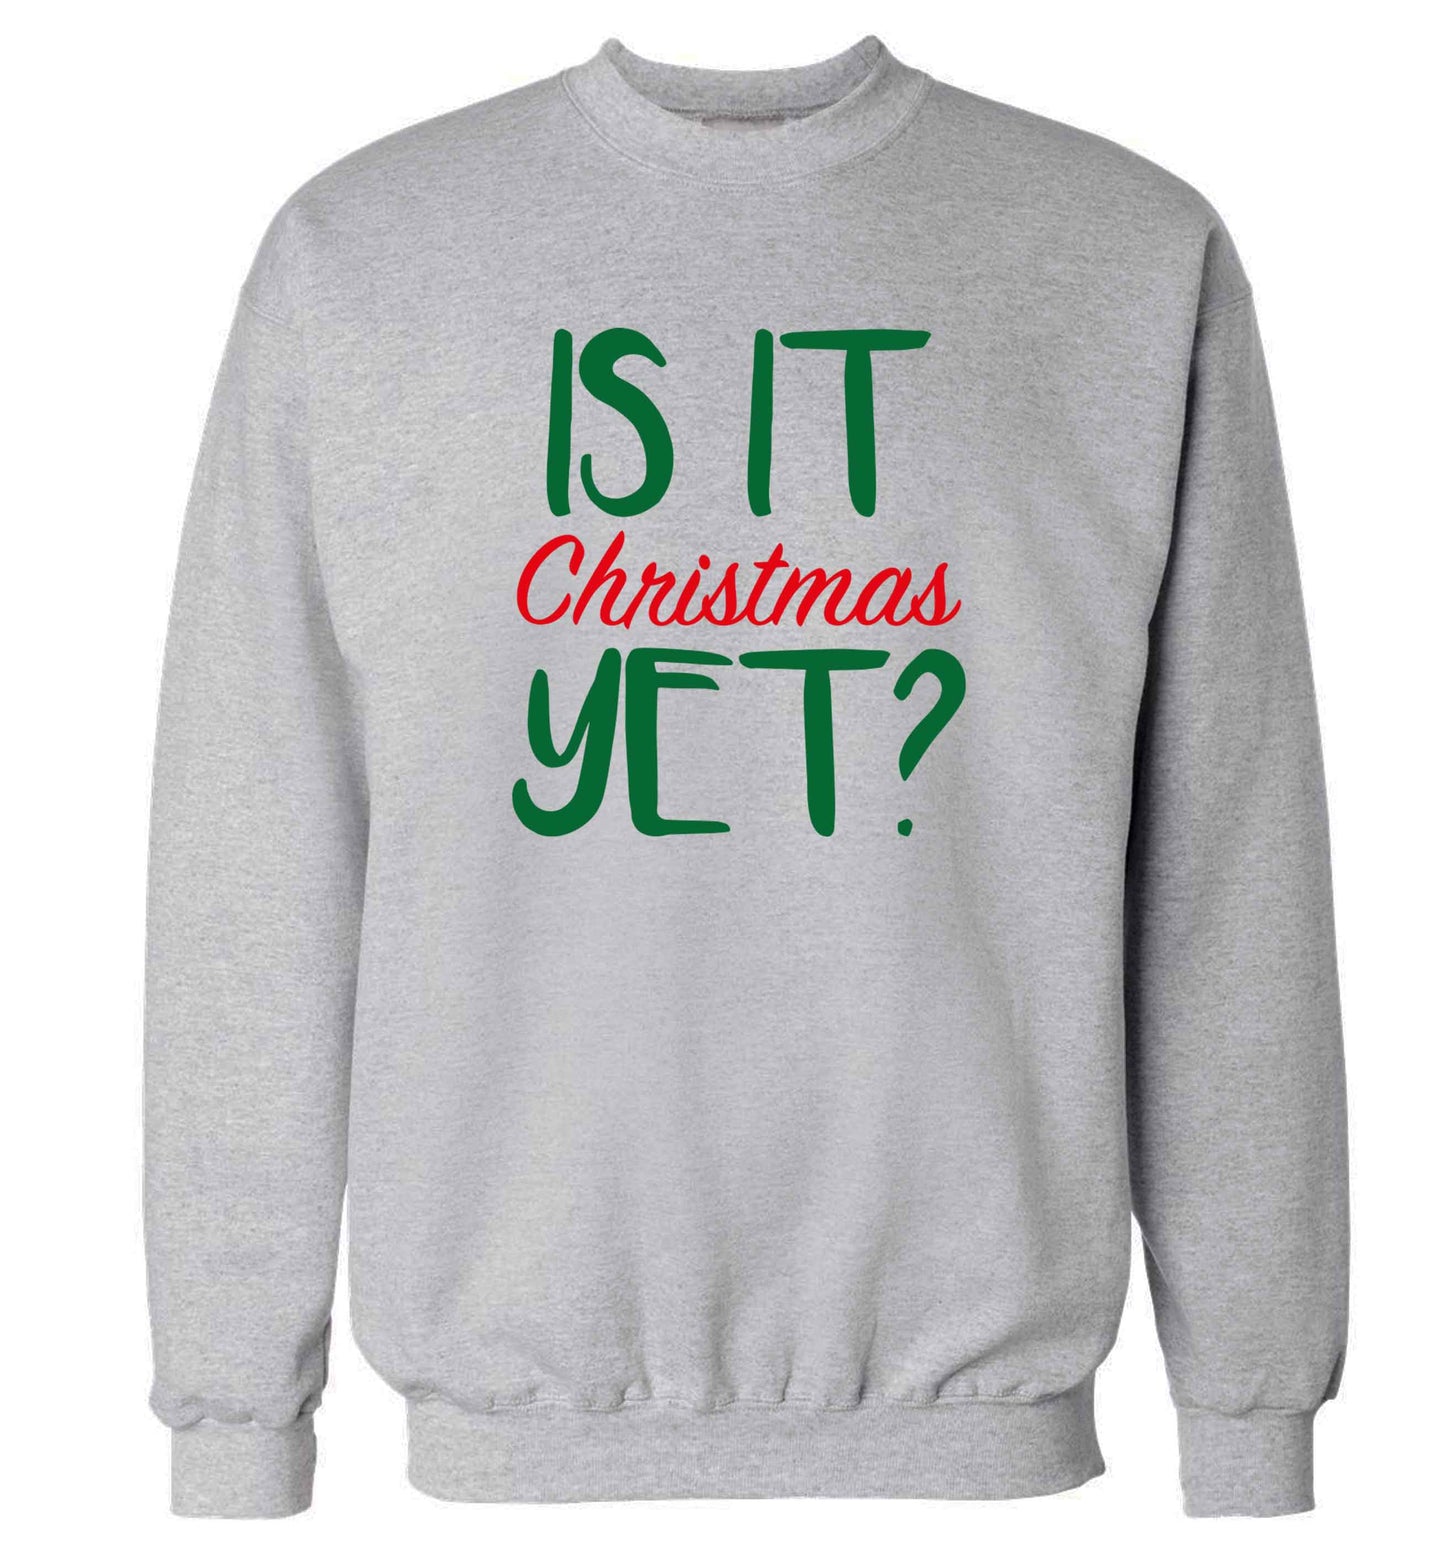 Is it Christmas yet? adult's unisex grey sweater 2XL